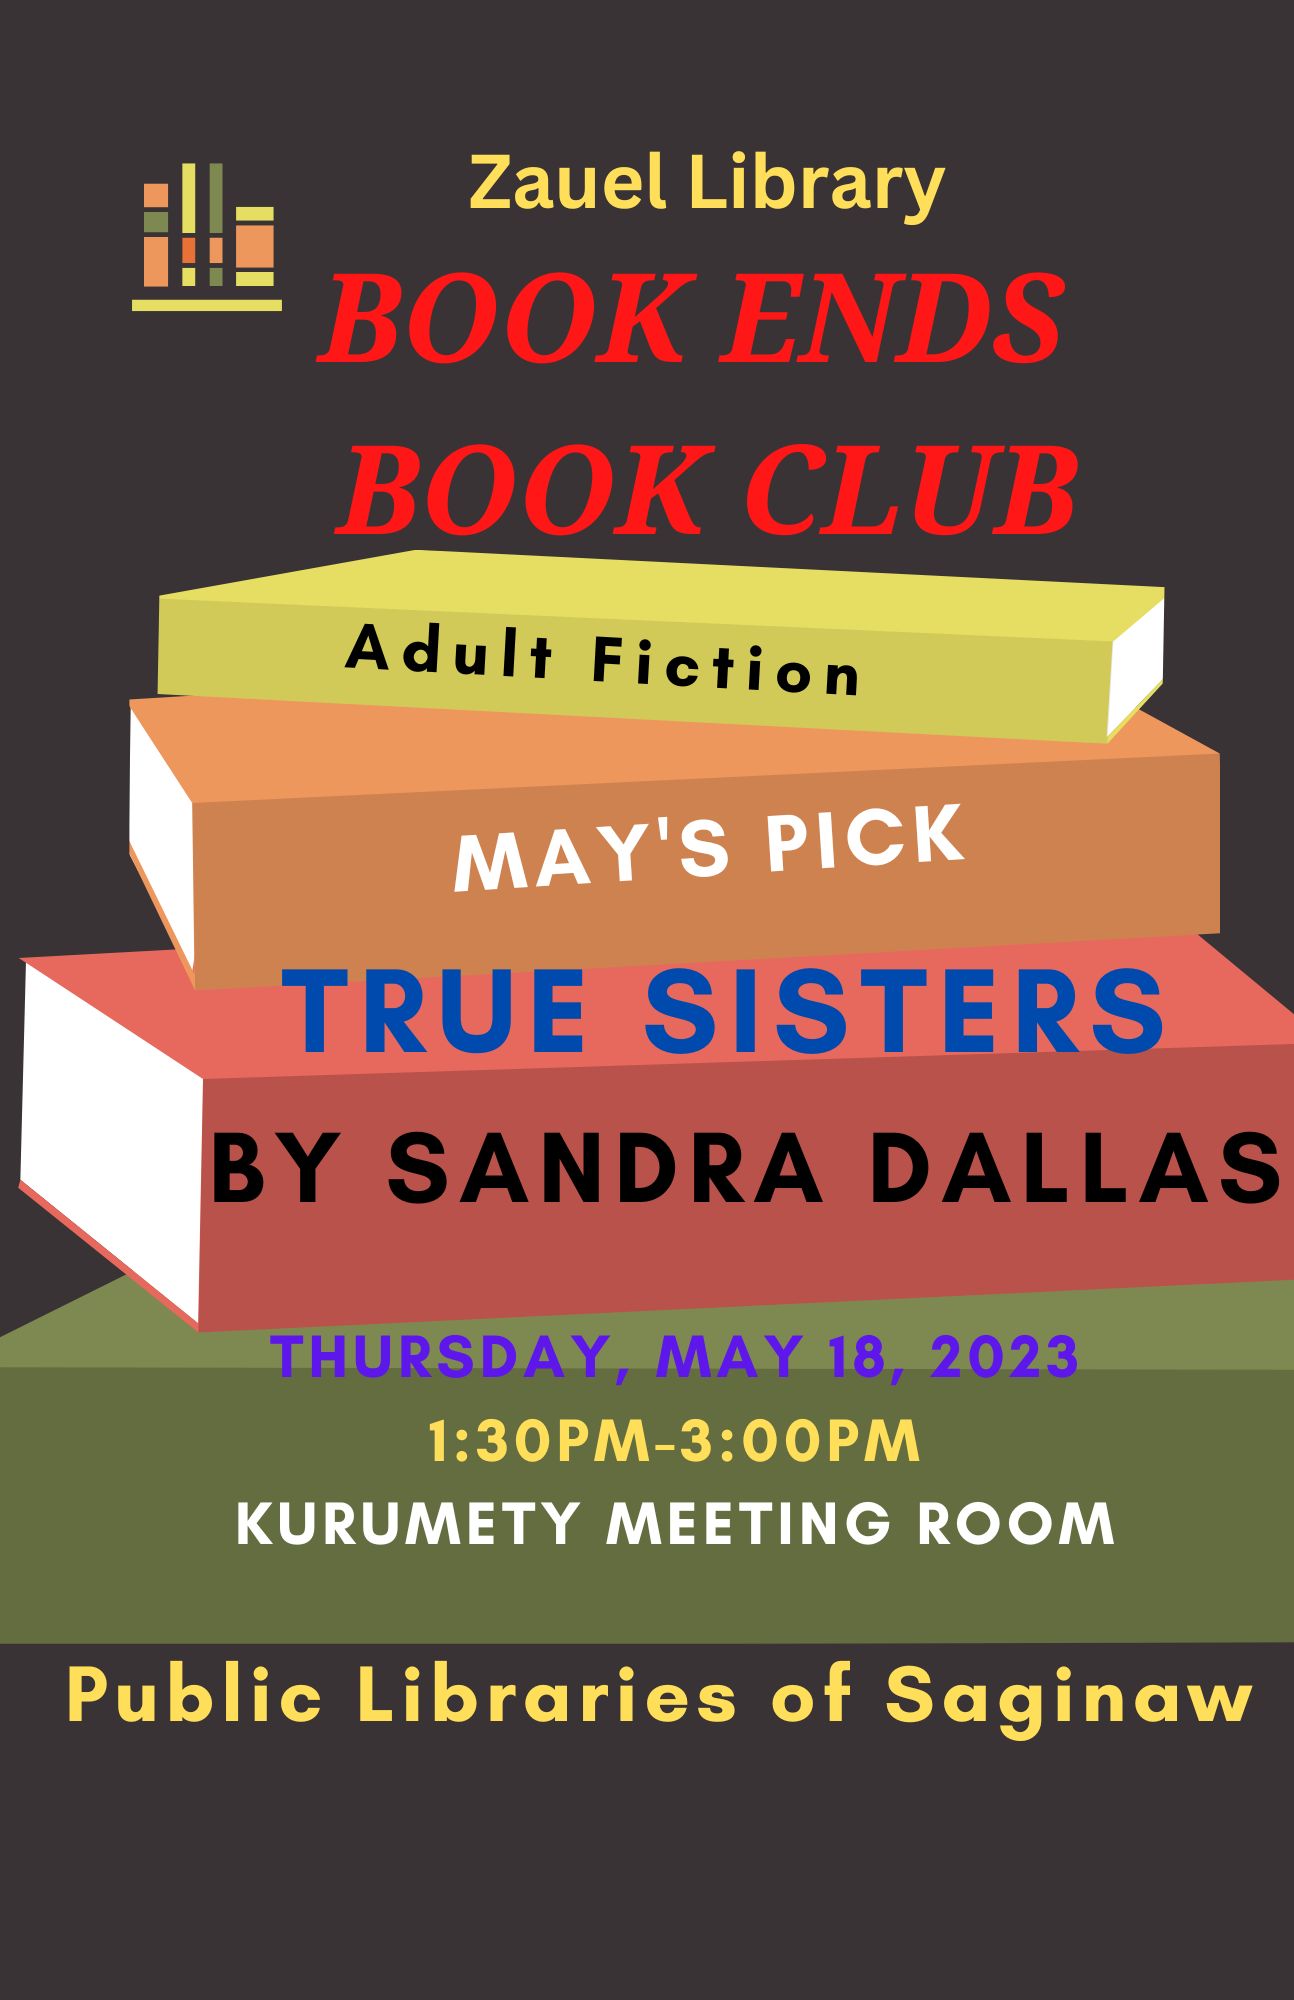 Book Ends Book Club at Zauel Library May 18 at 1:30 p.m. The selection is "True Sisters" by Sandra Dallas